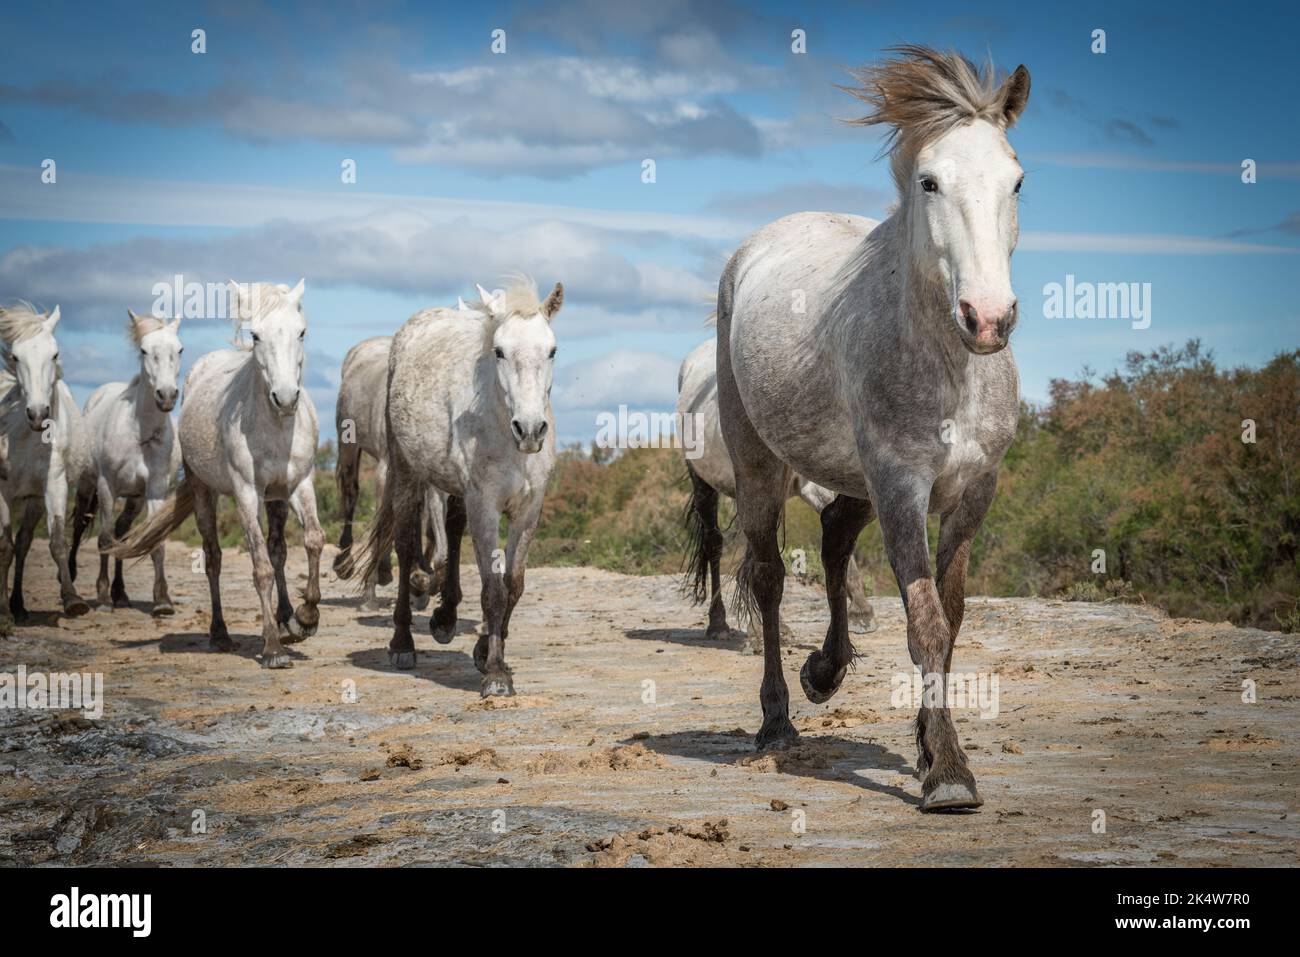 Herd of white horses are taking time on the beach. Image taken in Camargue, France. Stock Photo